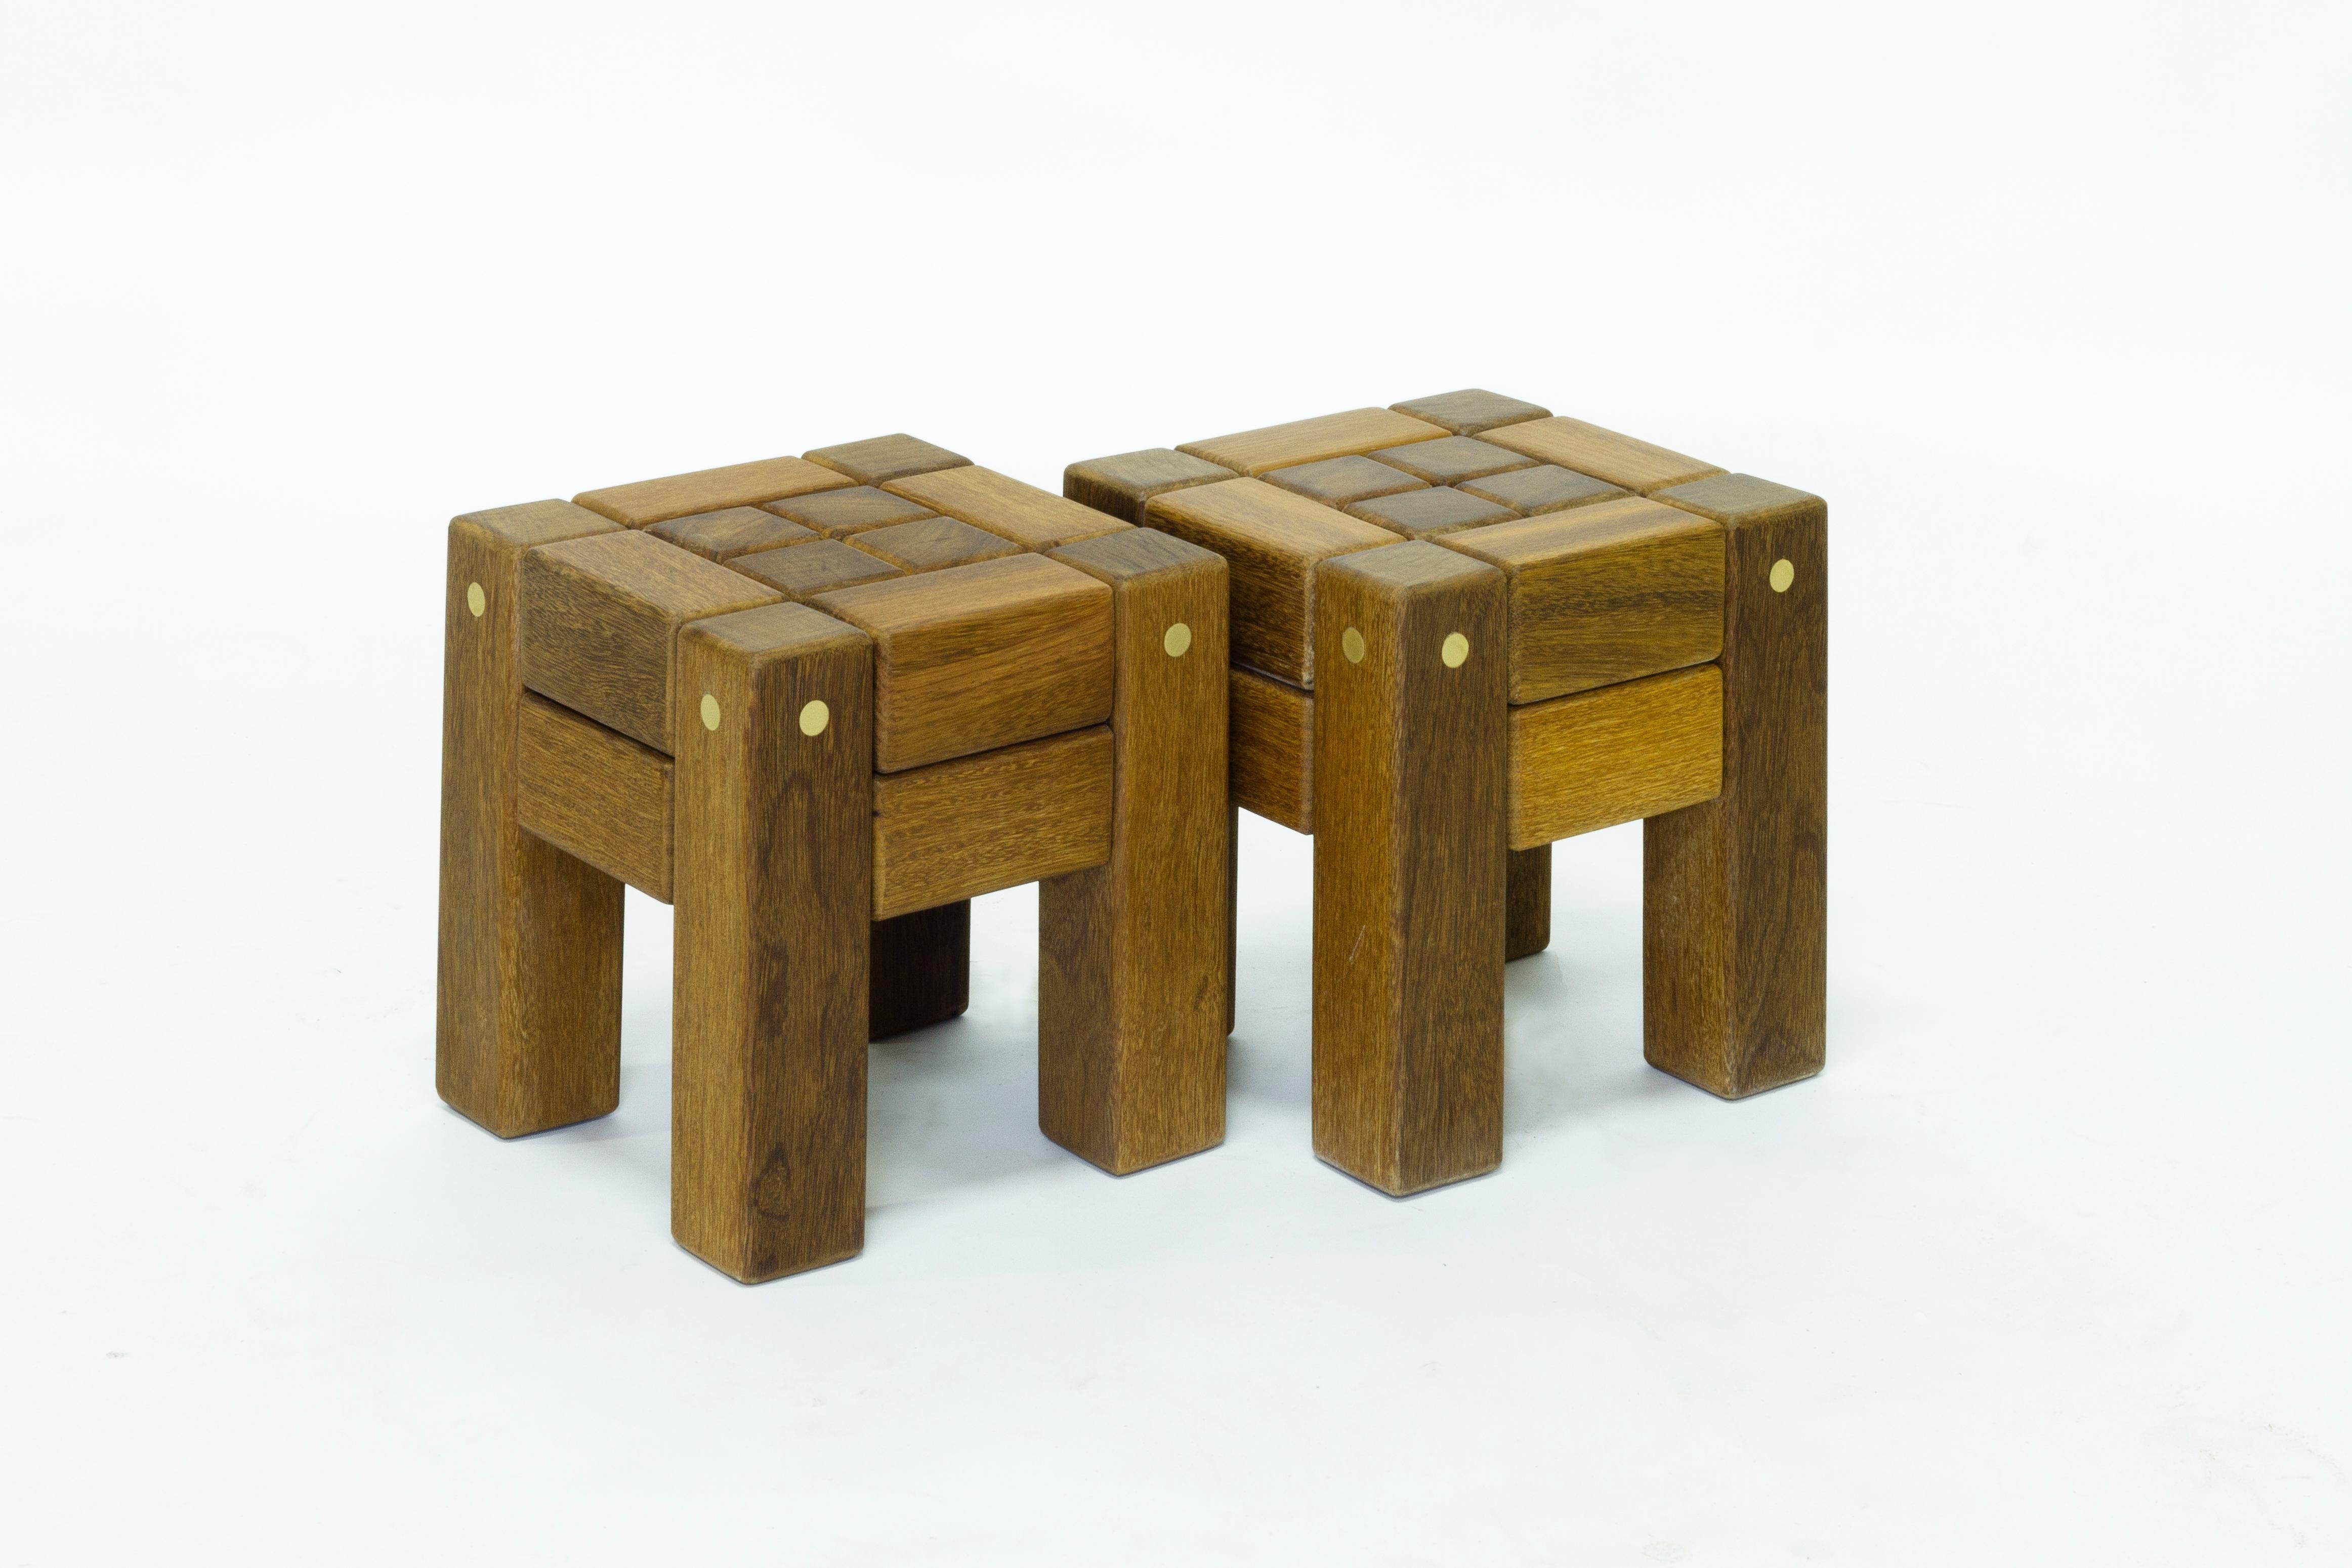 Stool in Hardwood and Brass. Brazilian Contemporary Design by O Formigueiro. (Holzarbeit) im Angebot